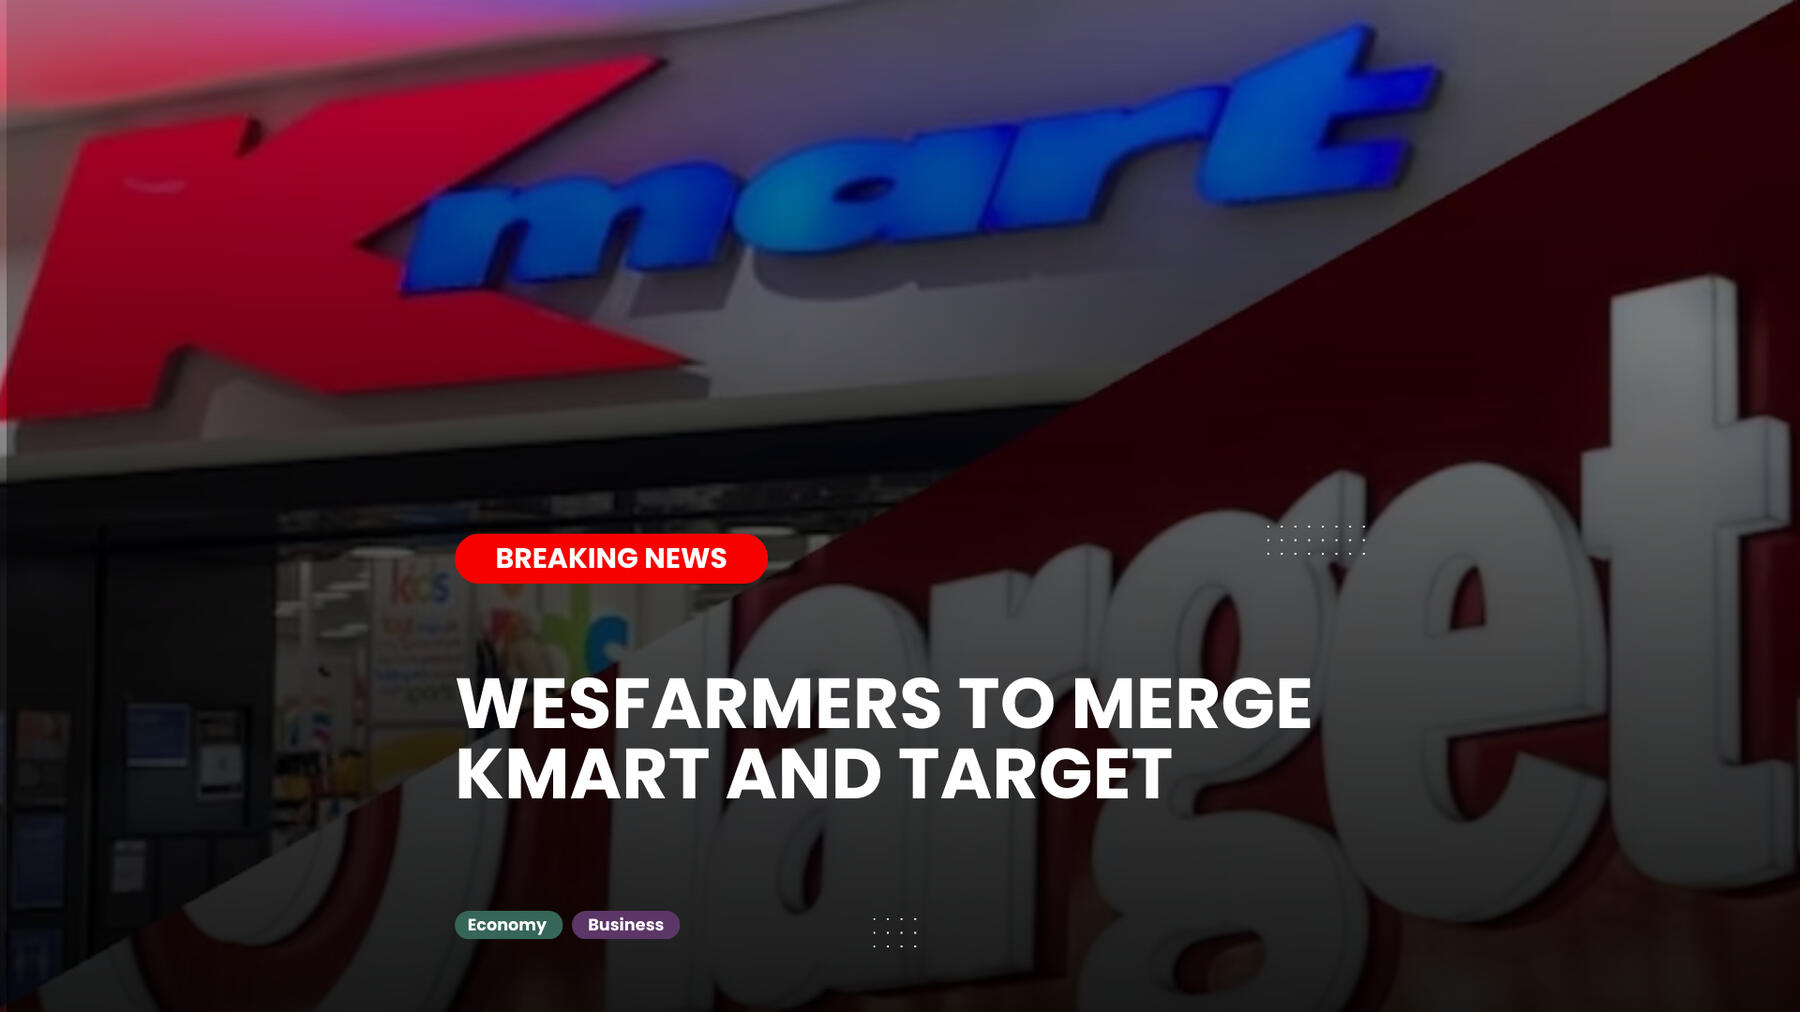 Kmart and Target: A Powerful Dual-Brand Merger for Retail Success